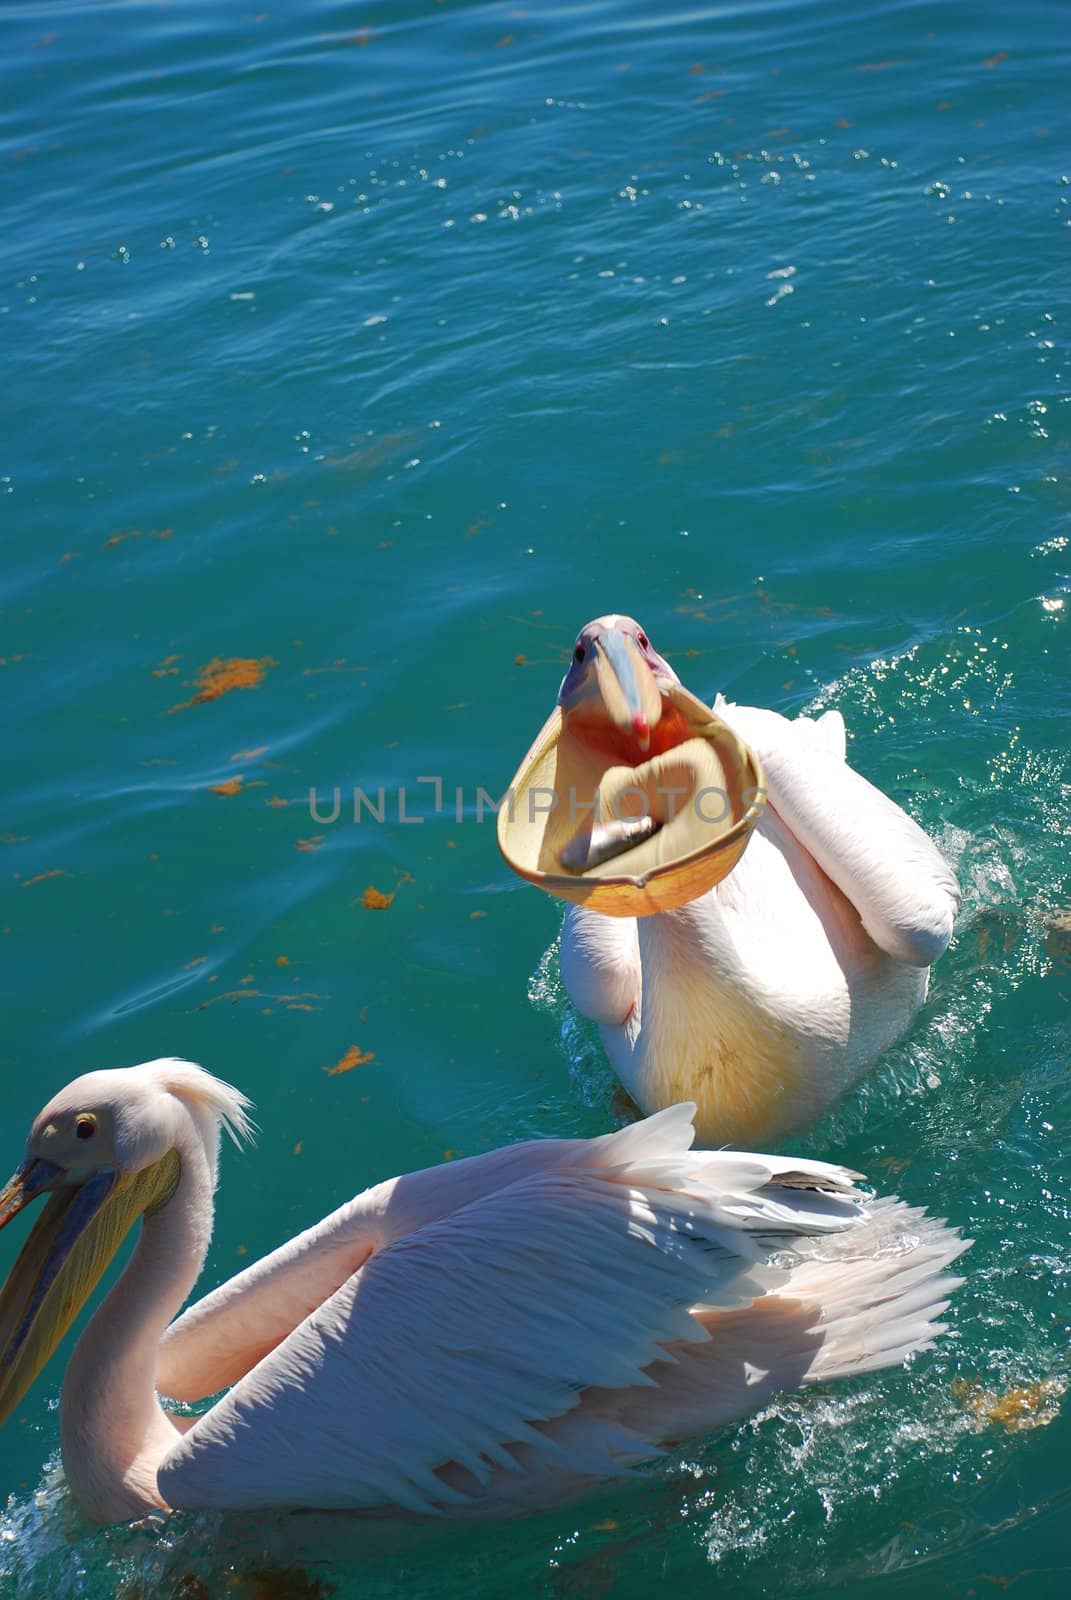 A close shot of a pelican eating fish against a blue water